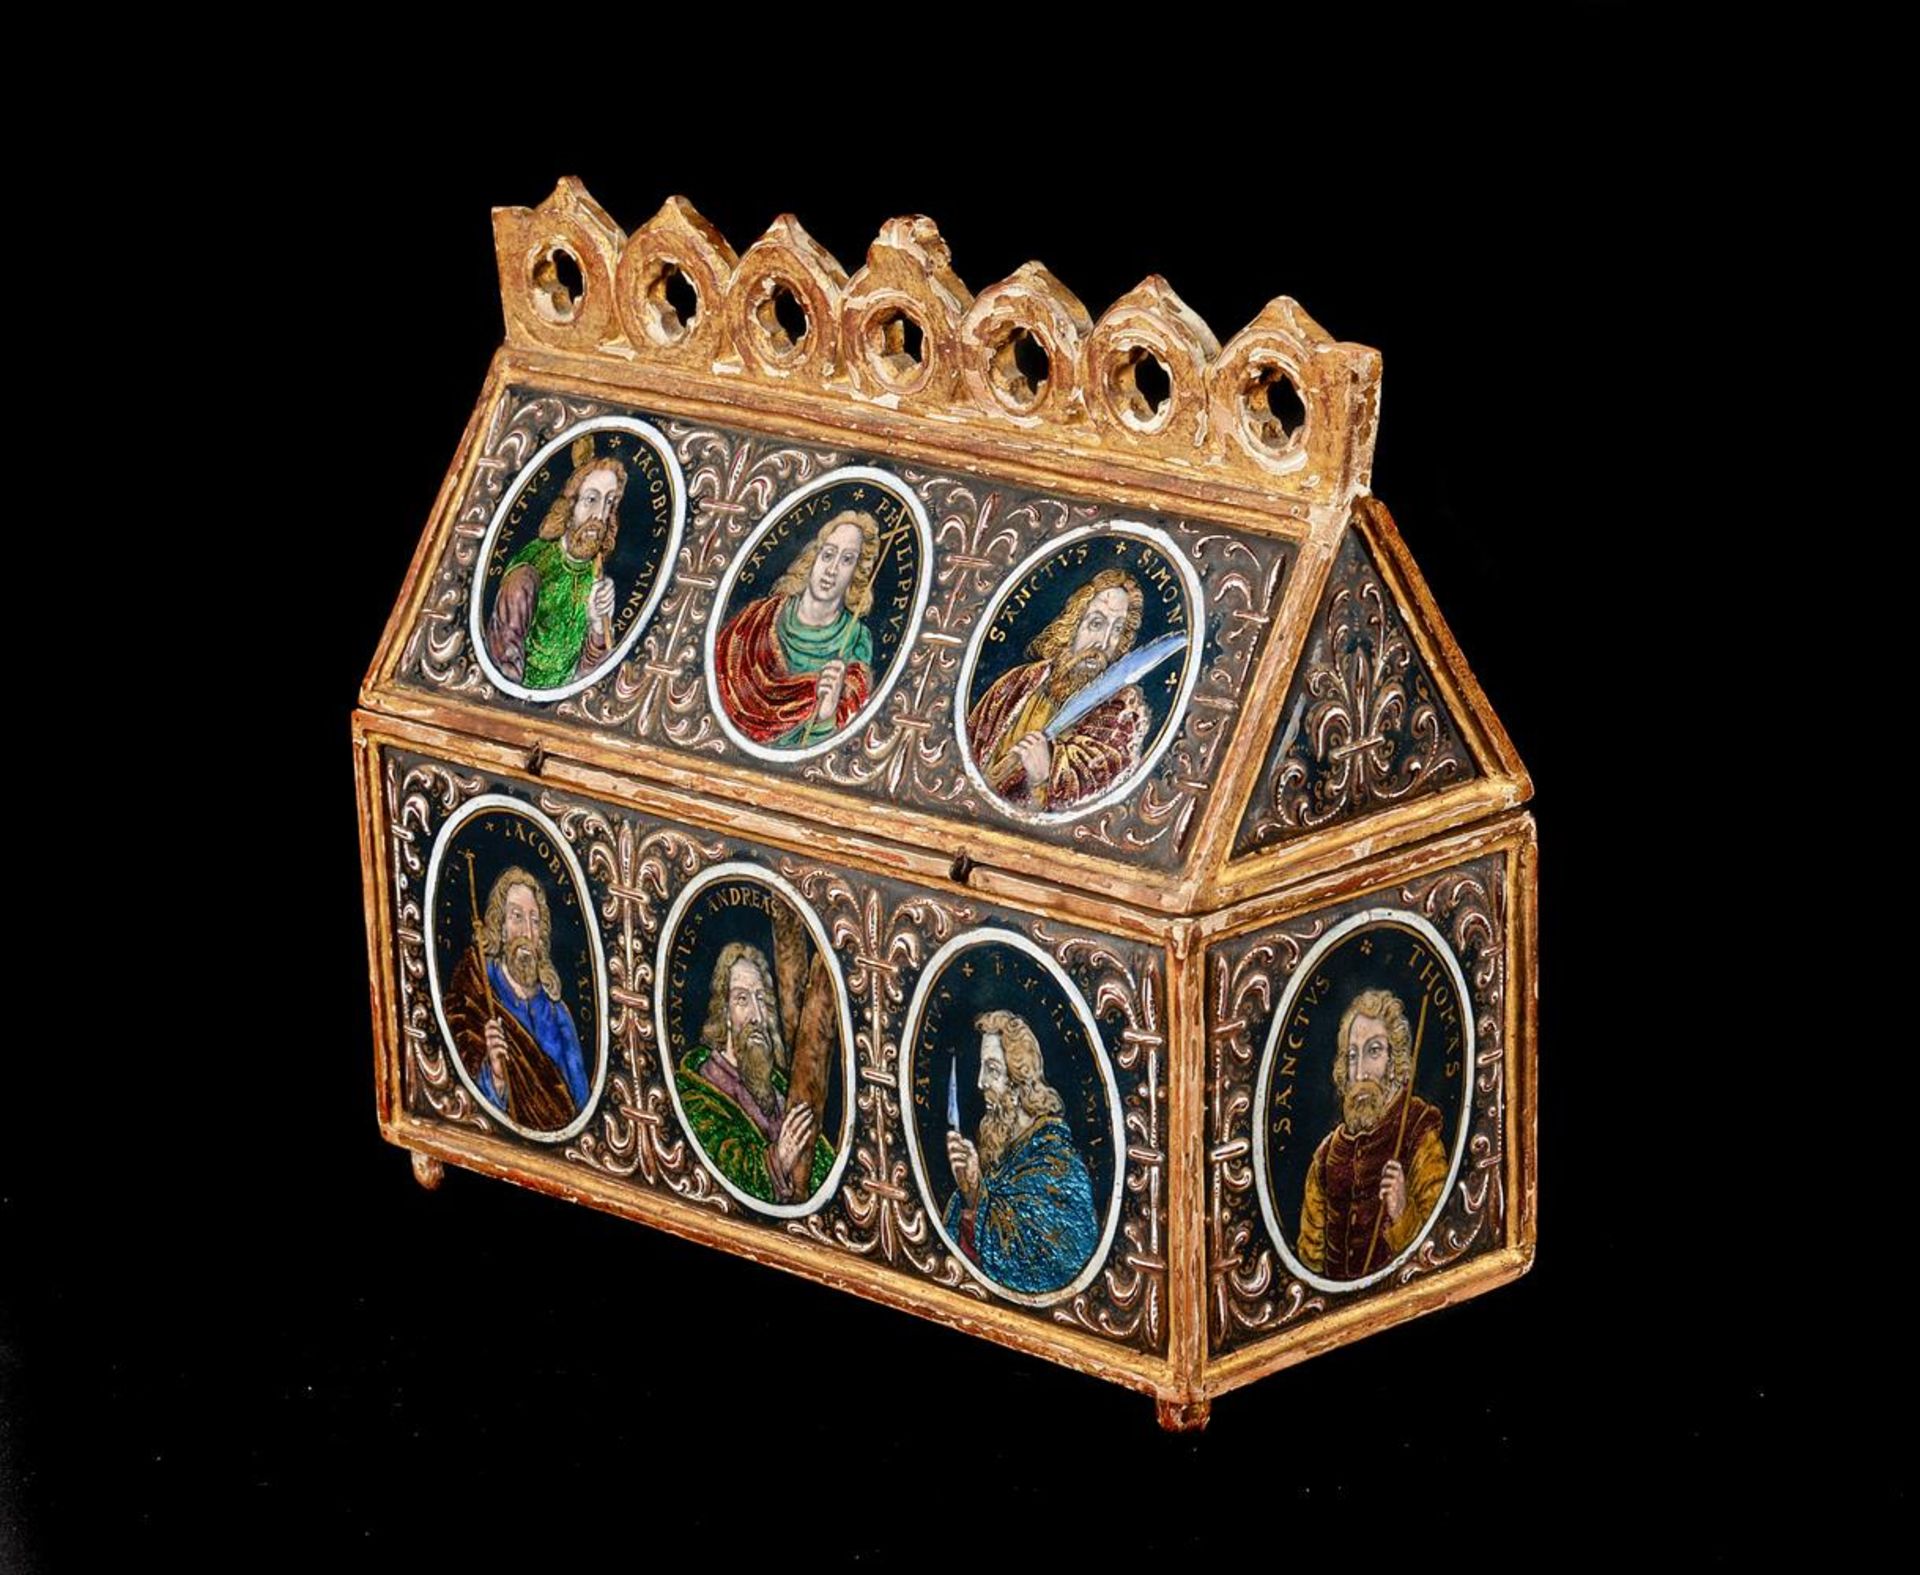 A GILTWOOD AND ENAMEL SET CHASSE OR CASKET, IN THE 16TH CENTURY LIMOGES MANNER - Image 2 of 8